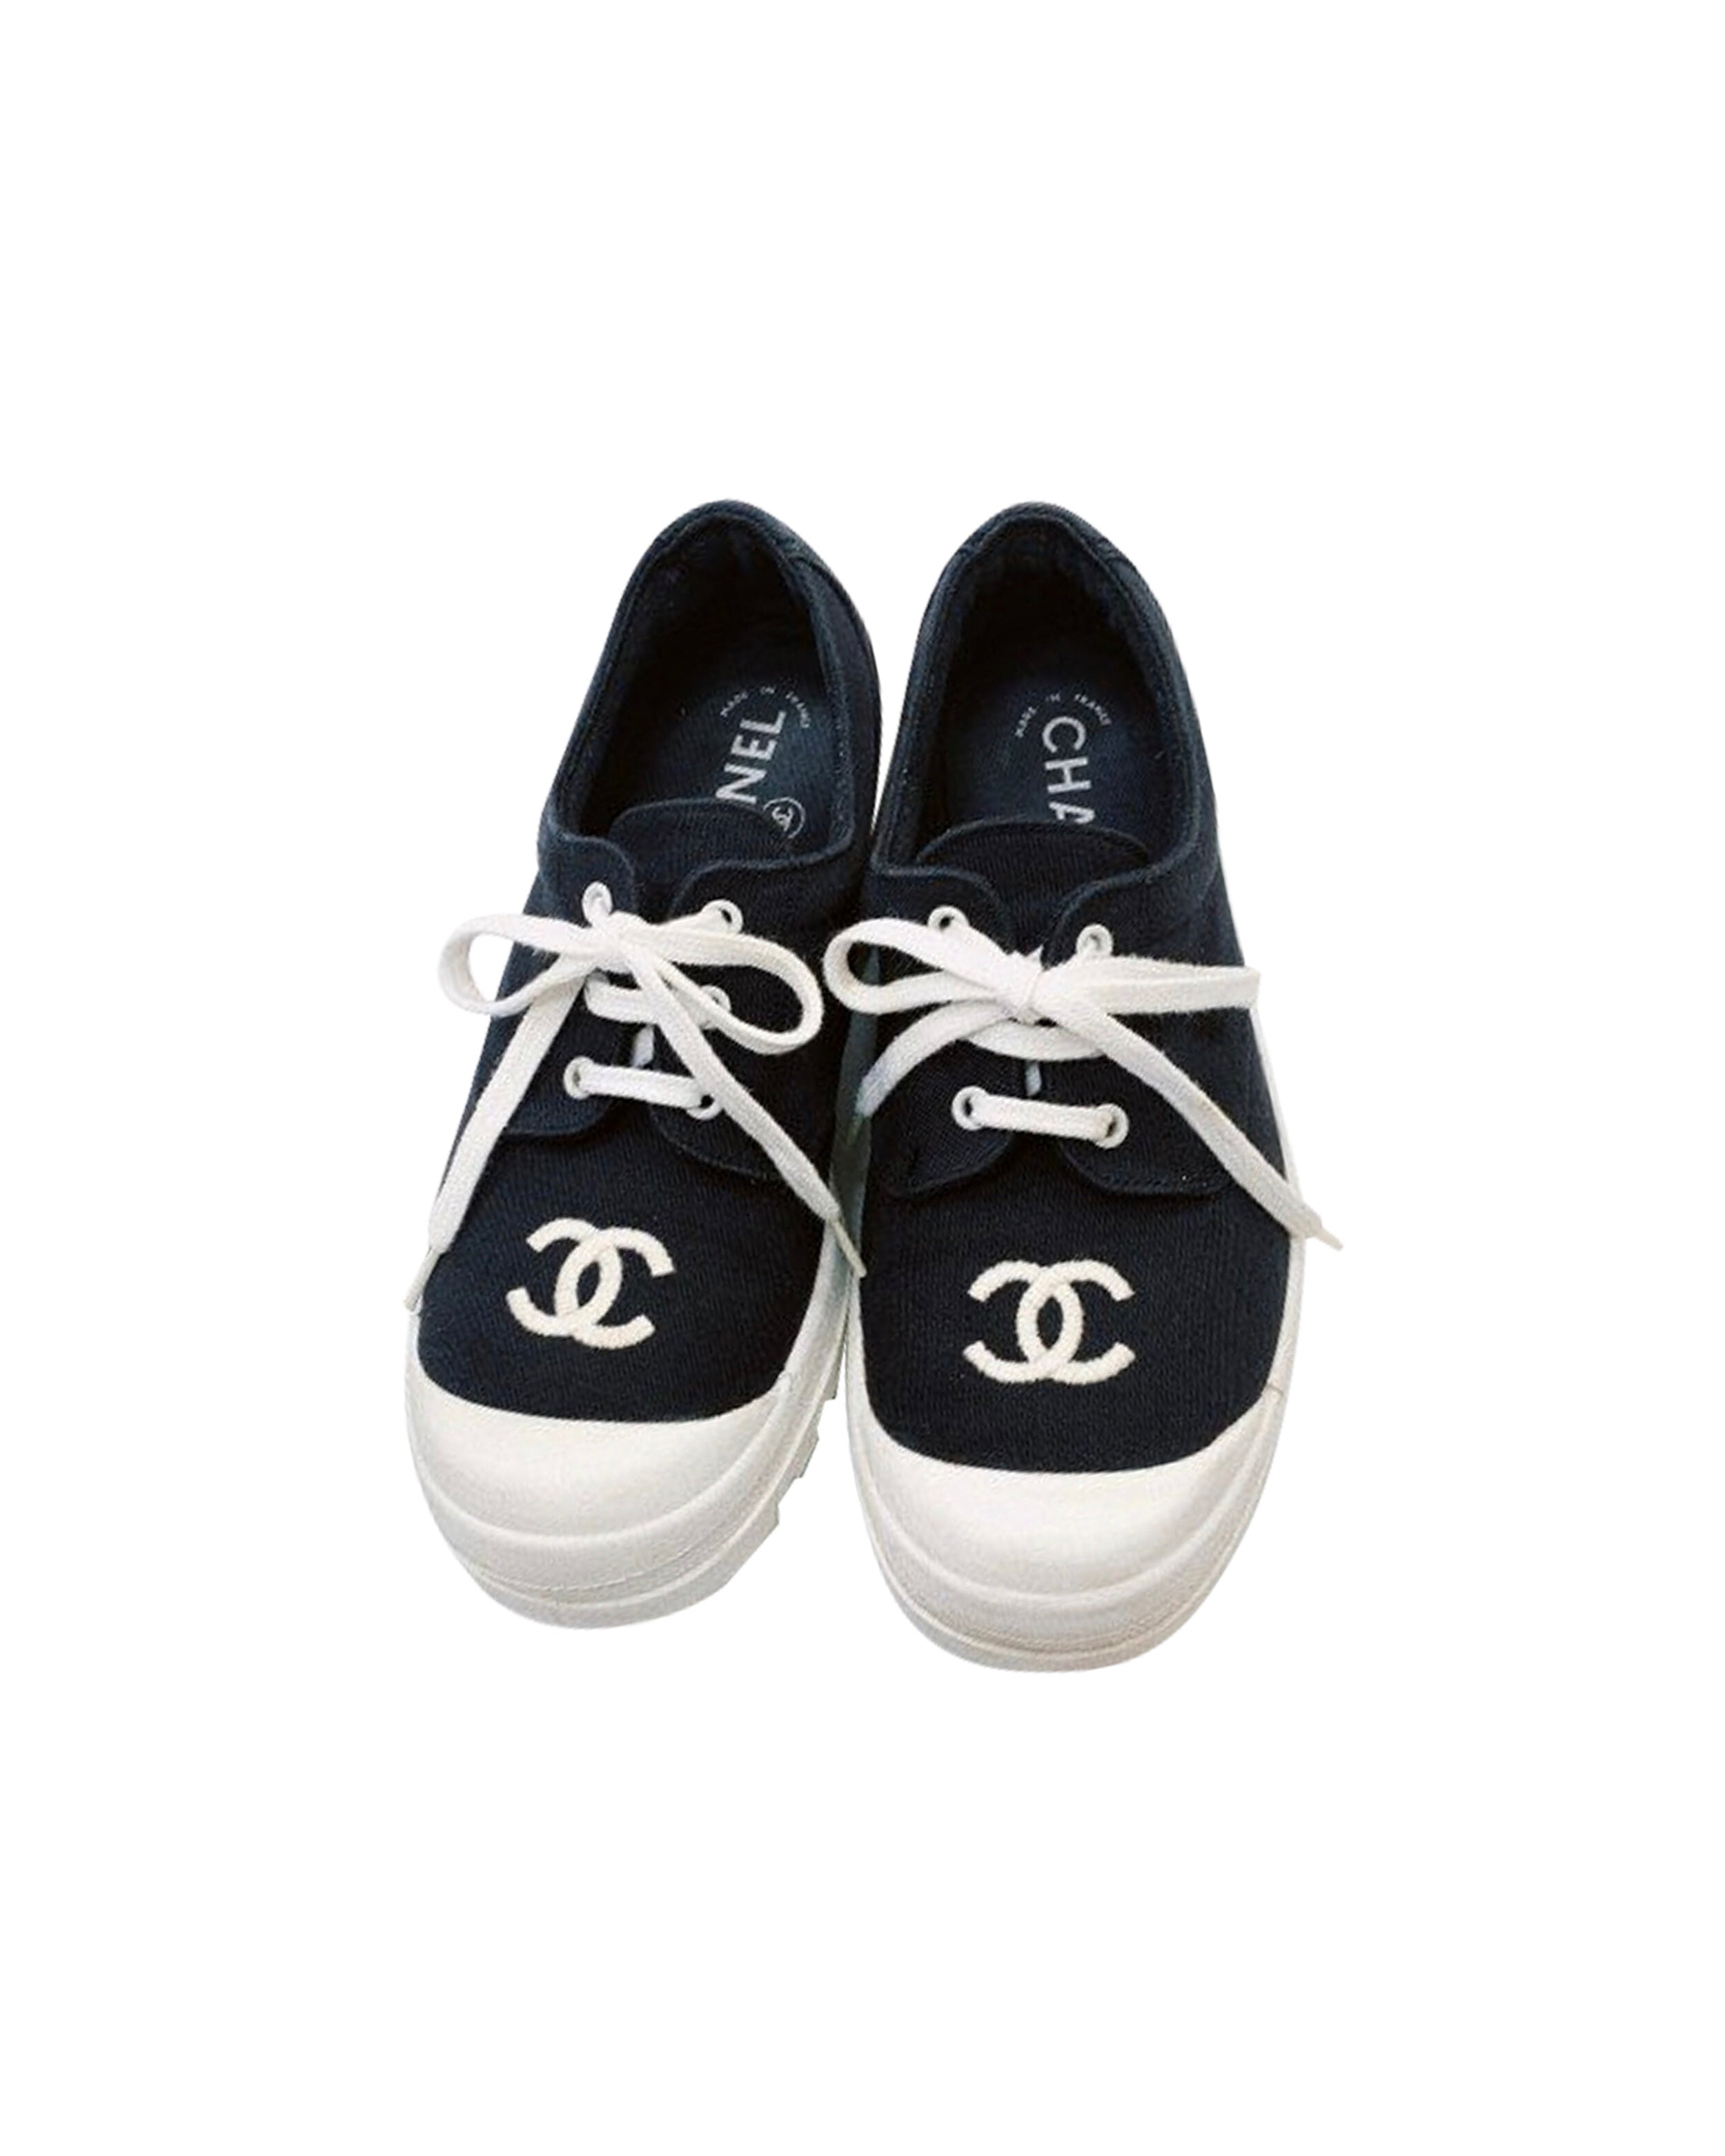 Chanel 2000s Cotton CC Black and White Sneakers